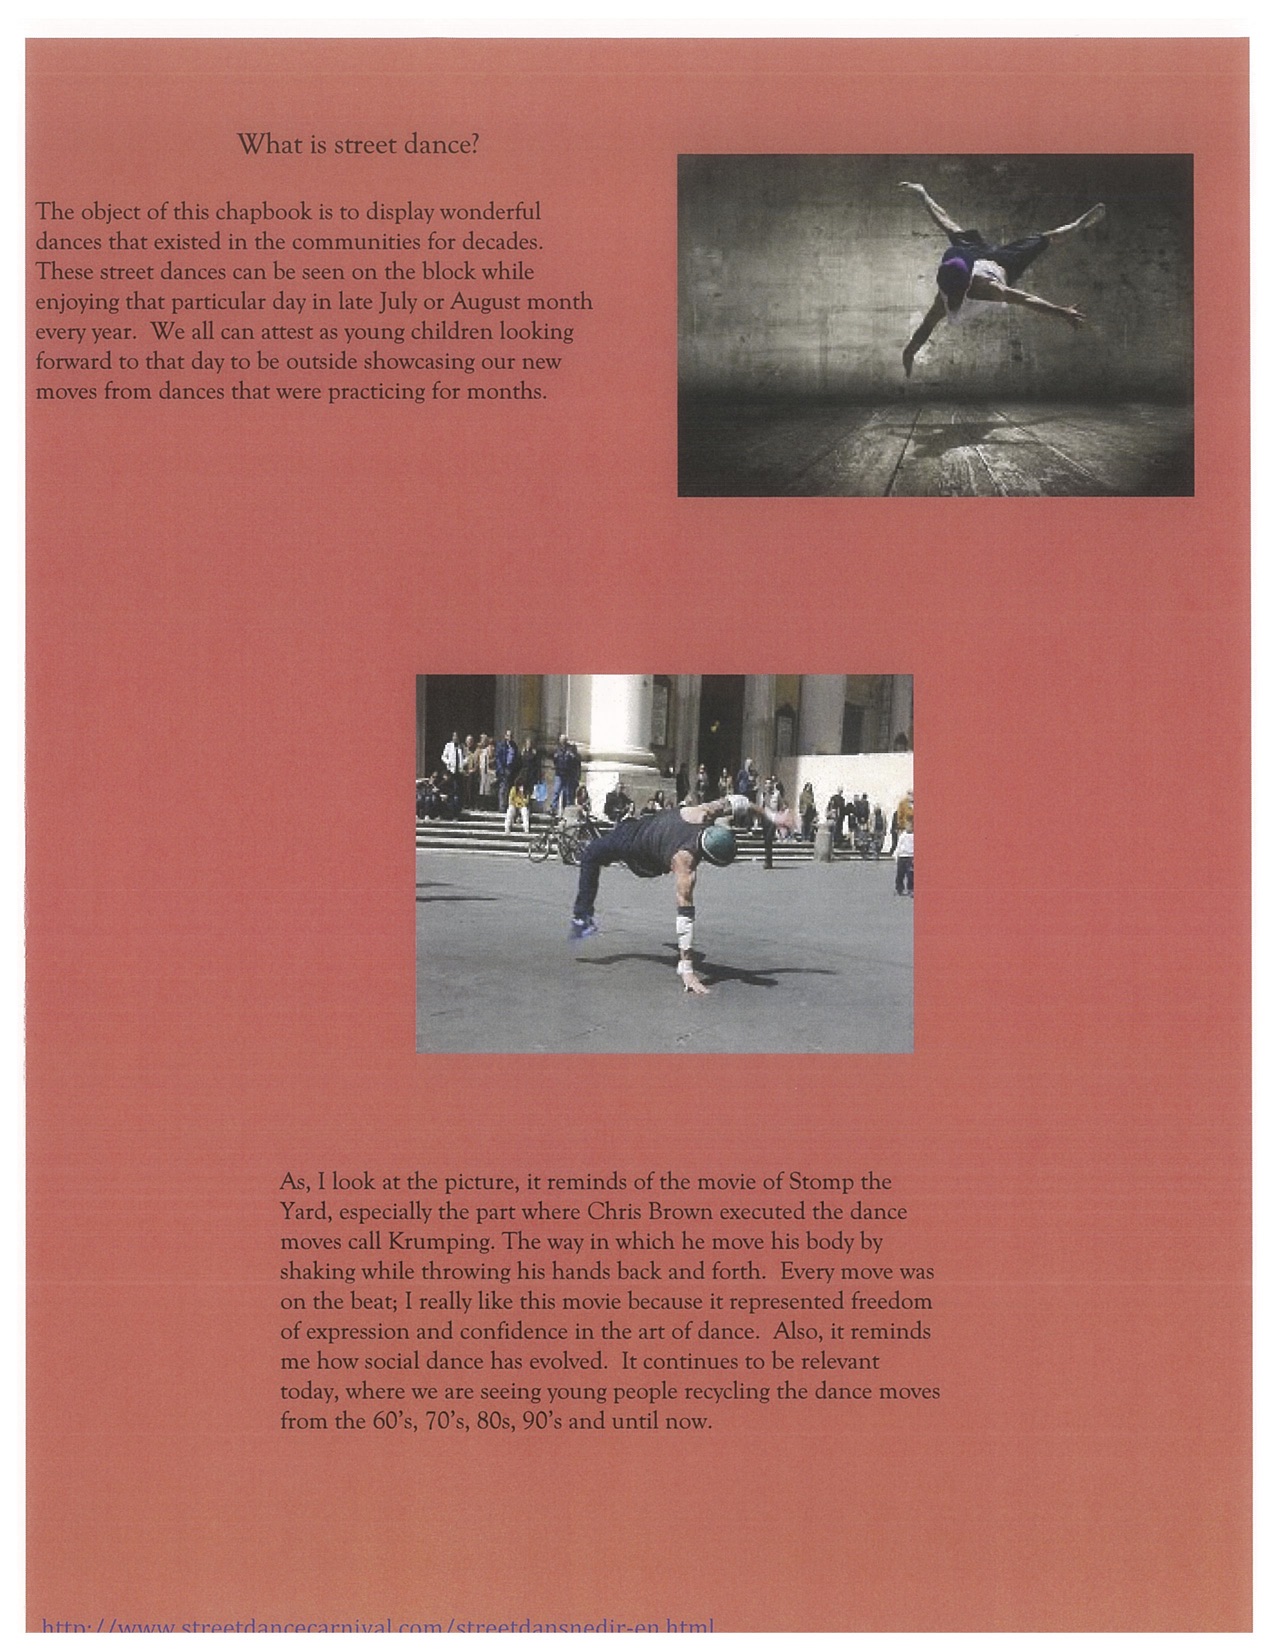 Page 1. displays some History of Street Dance.